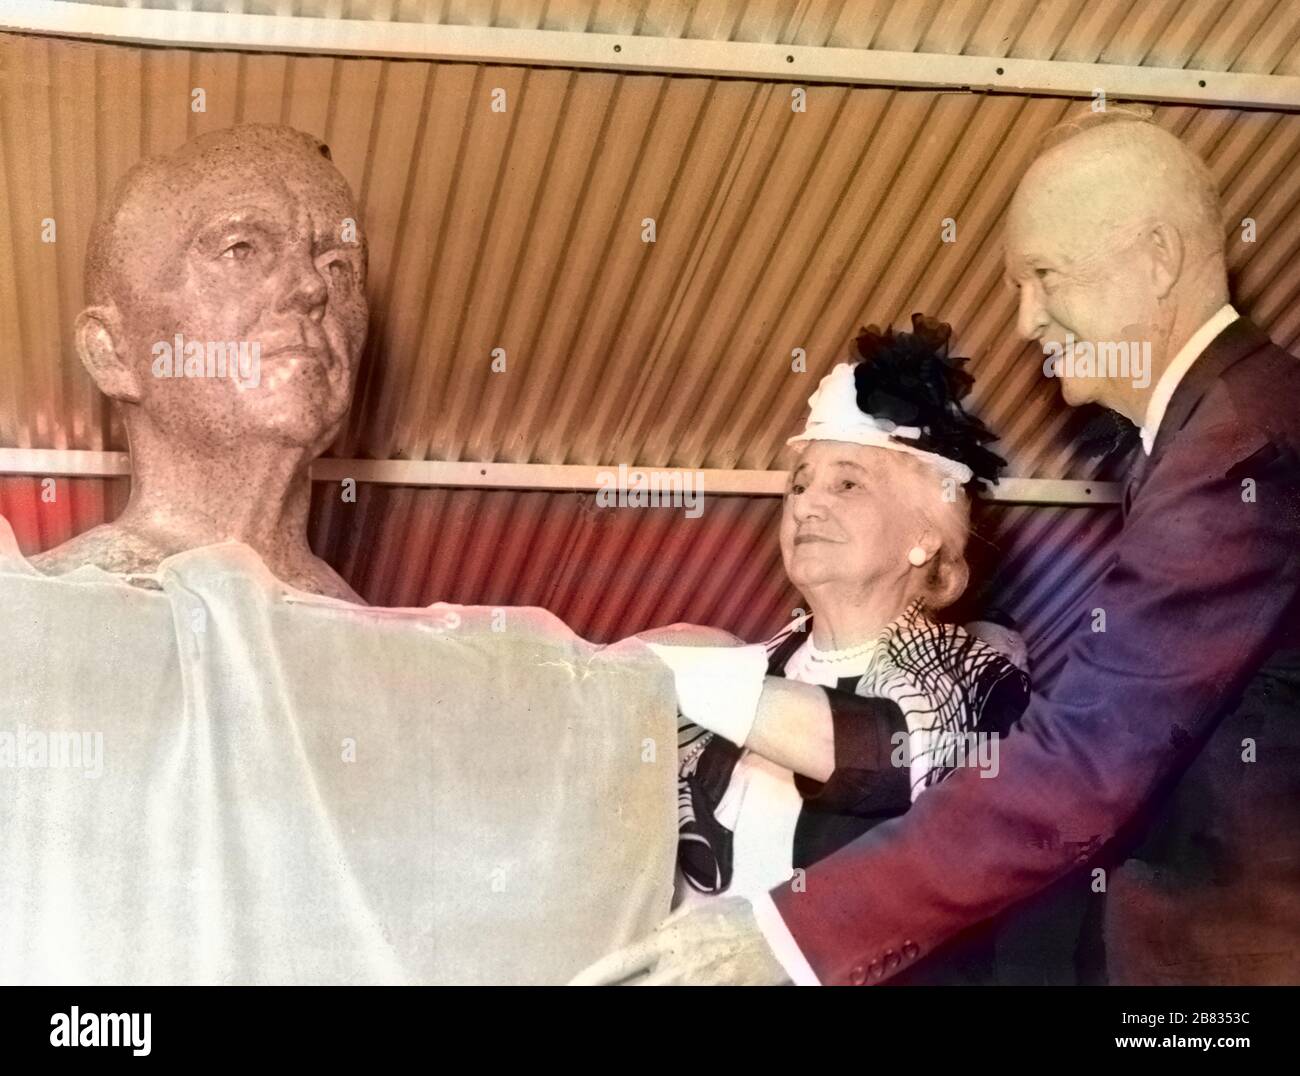 President Dwight D. Eisenhower and Mrs. Lily Coles Marshall unveiling the bronze bust of General George C. Marshall during the dedication ceremony of the Marshall Space Flight Center (MSFC) in Huntsville, Alabama, October 21, 1960. Image courtesy National Aeronautics and Space Administration (NASA). Note: Image has been digitally colorized using a modern process. Colors may not be period-accurate. () Stock Photo